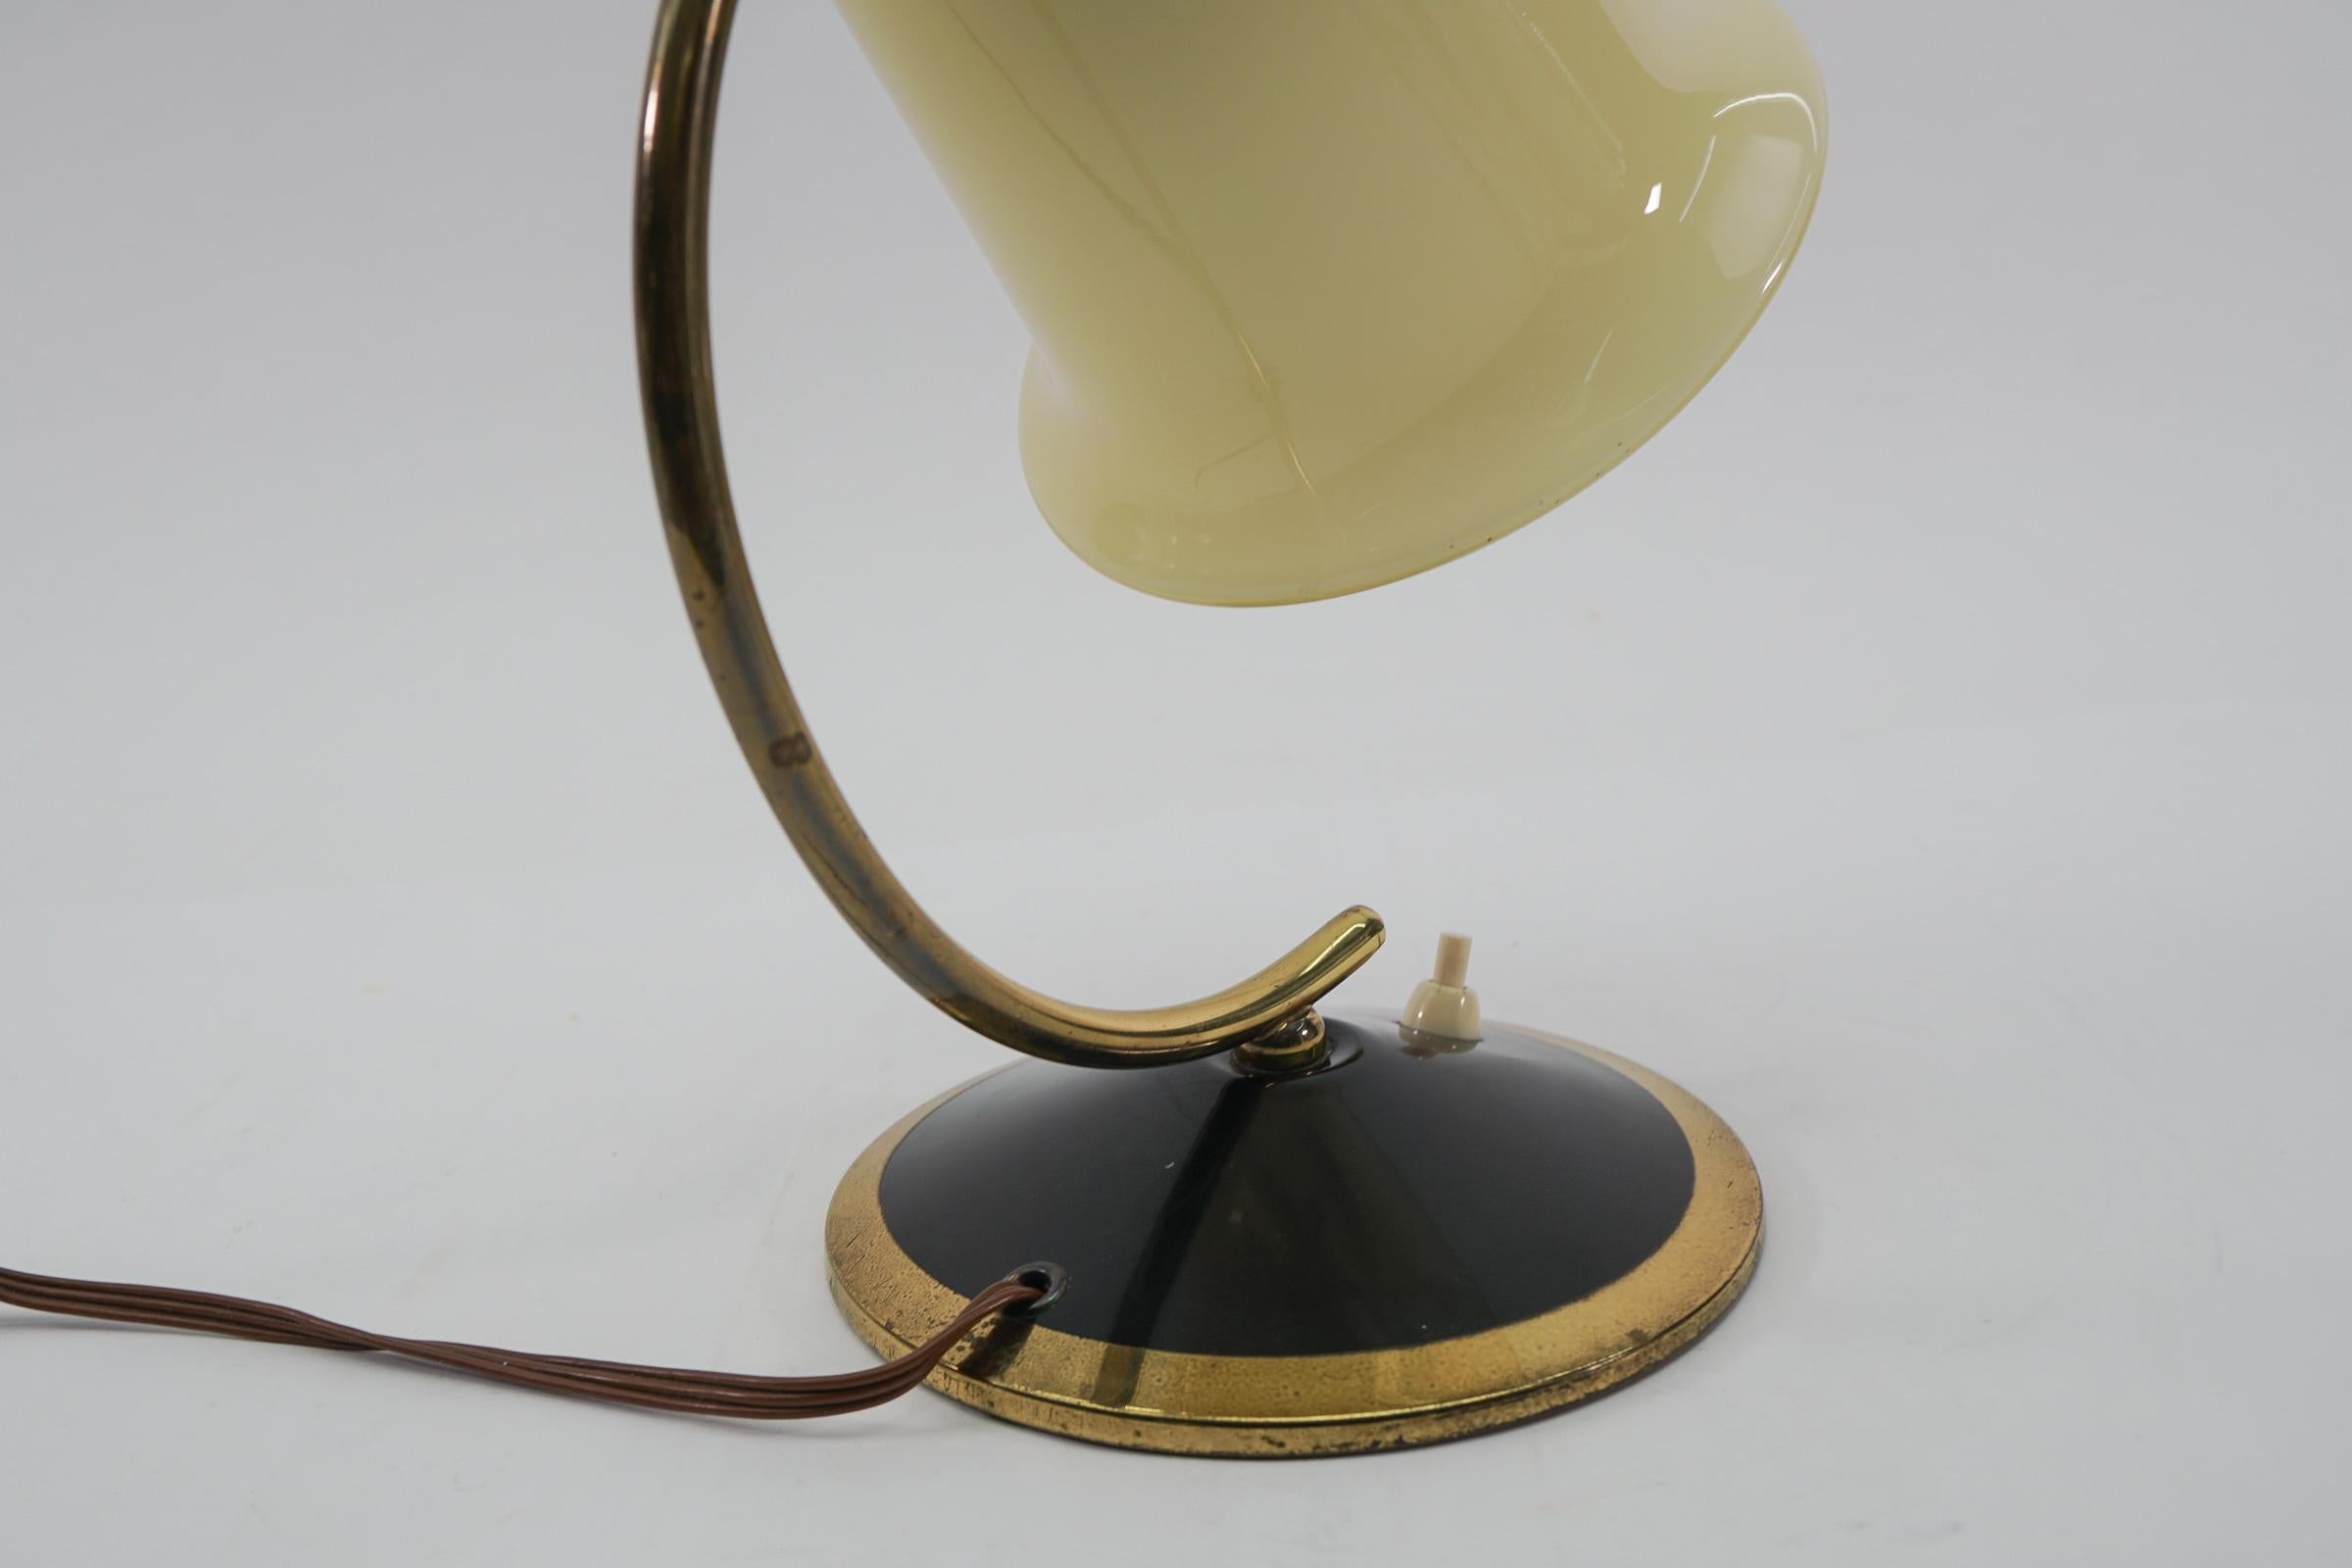 Lovely Midcentury Table Lampe Made in Glass and Brass, 1950s, Austria For Sale 4